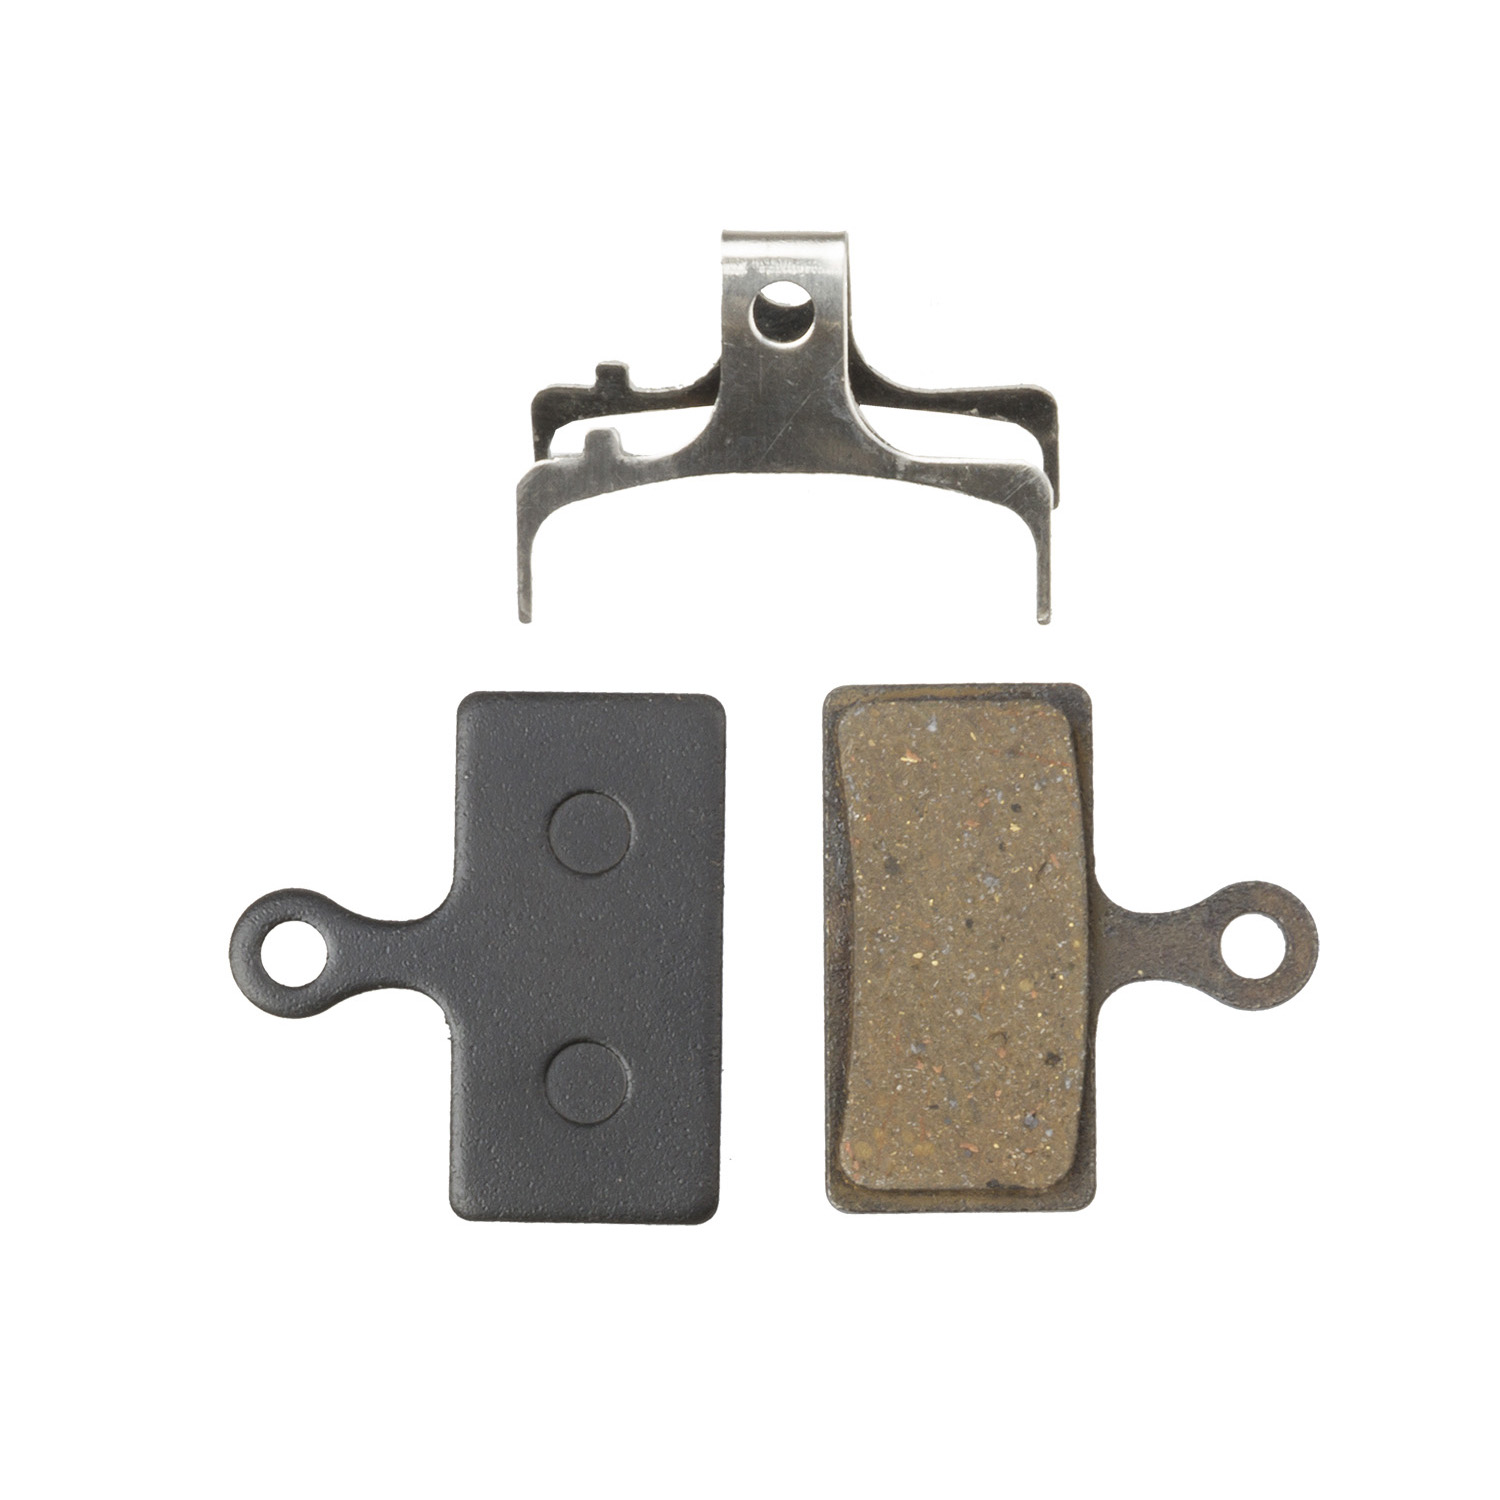 360744 – M-WAVE BPD Organic S1 brake pads for disc brake  – AVAILABLE IN SELECTED BIKE SHOPS